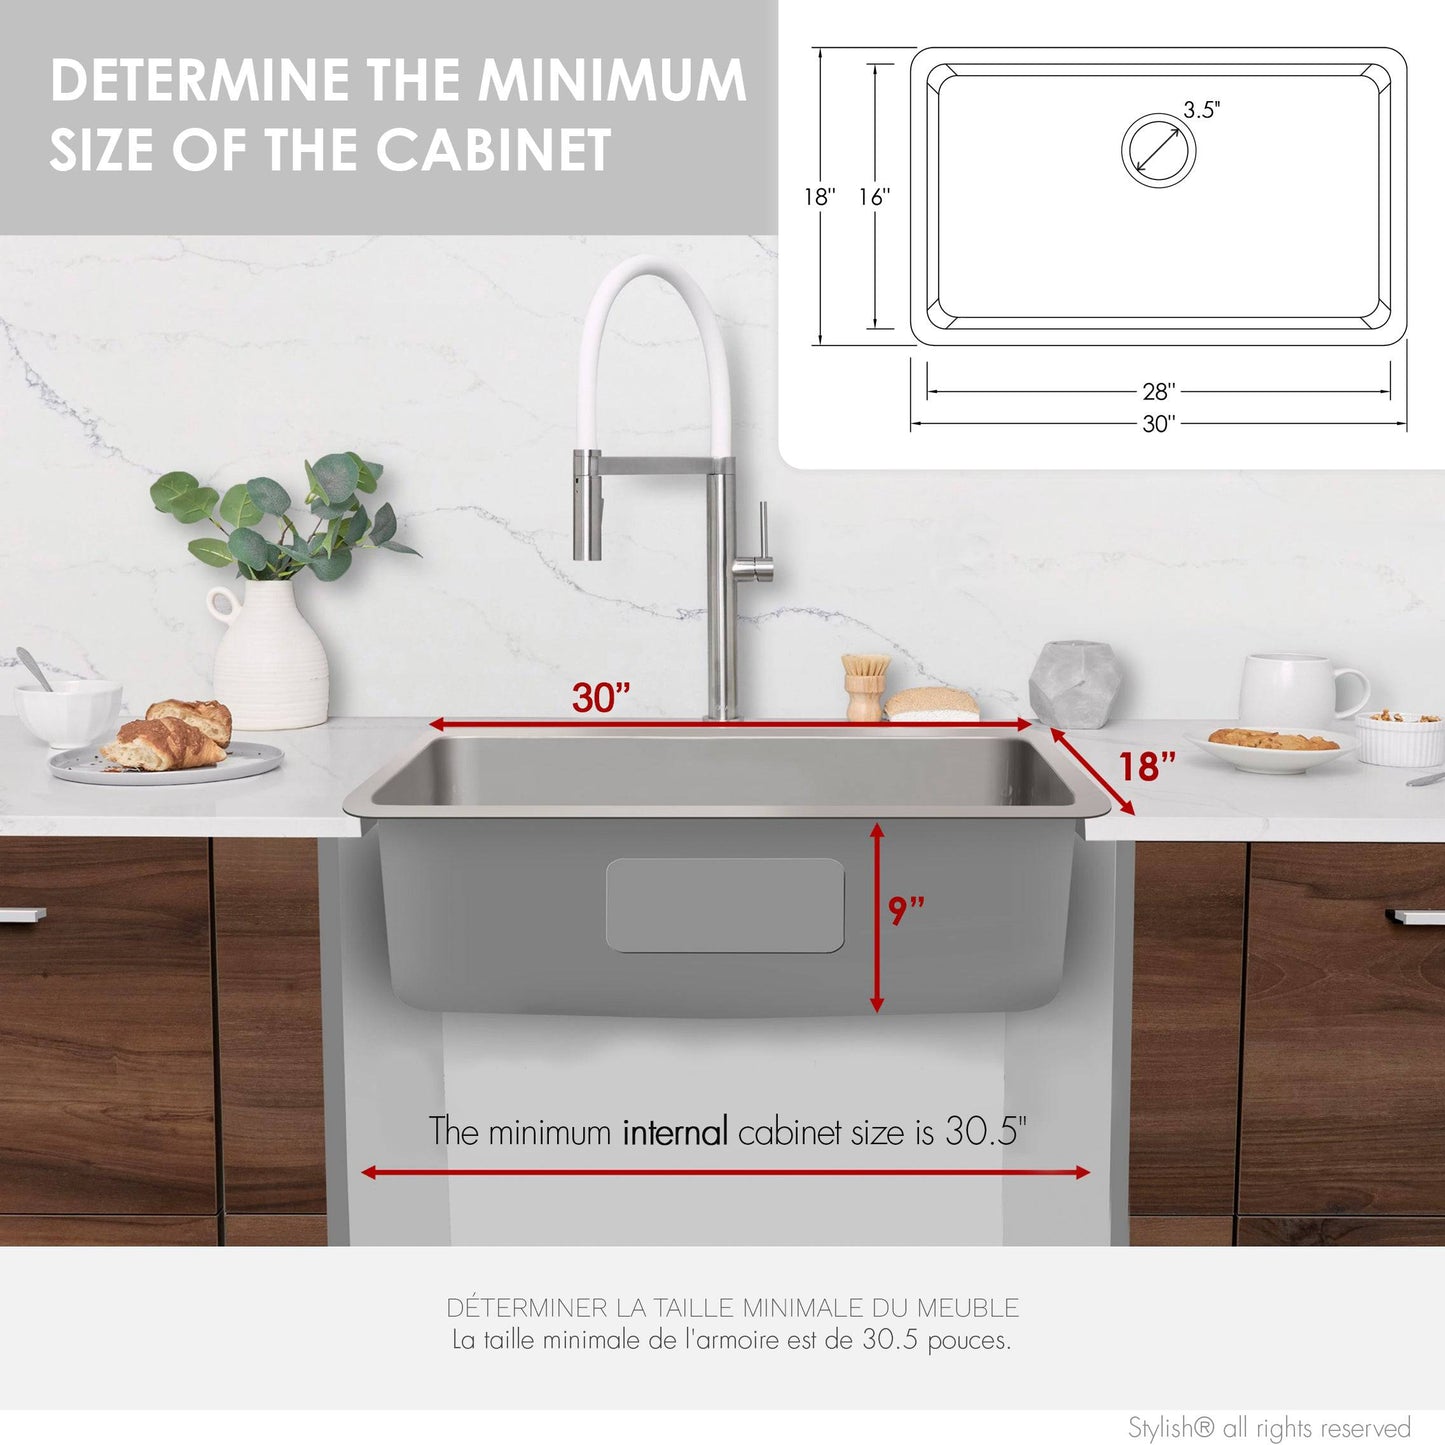 Stylish Malaga  30" Single Bowl Undermount and Drop-in Stainless Steel Kitchen Sink (S-411TG) - Renoz